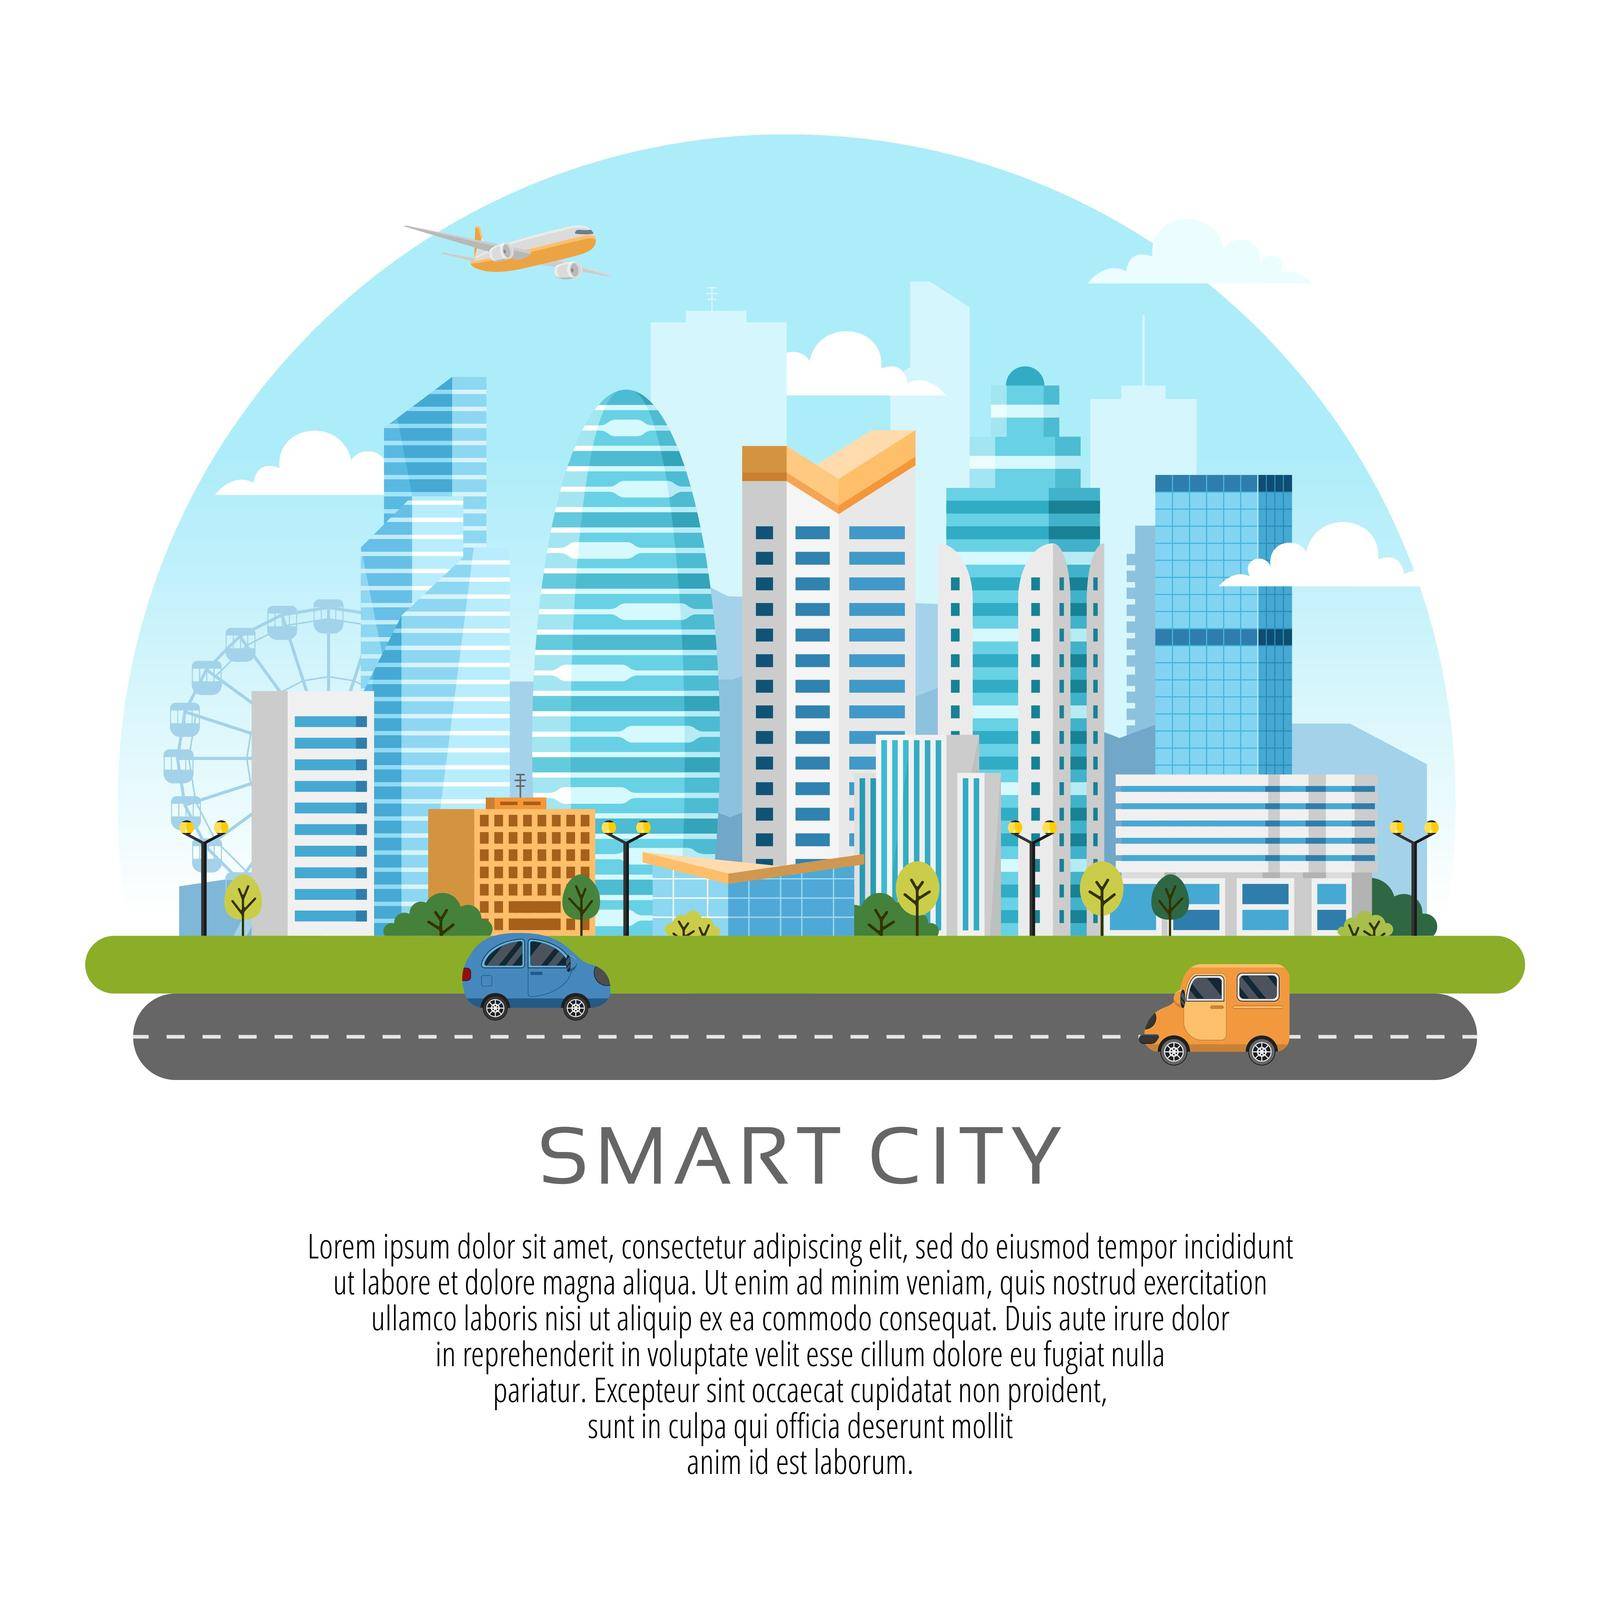 Round style urban landscape with buildings, skyscrapers and transport traffic. Vector illustration